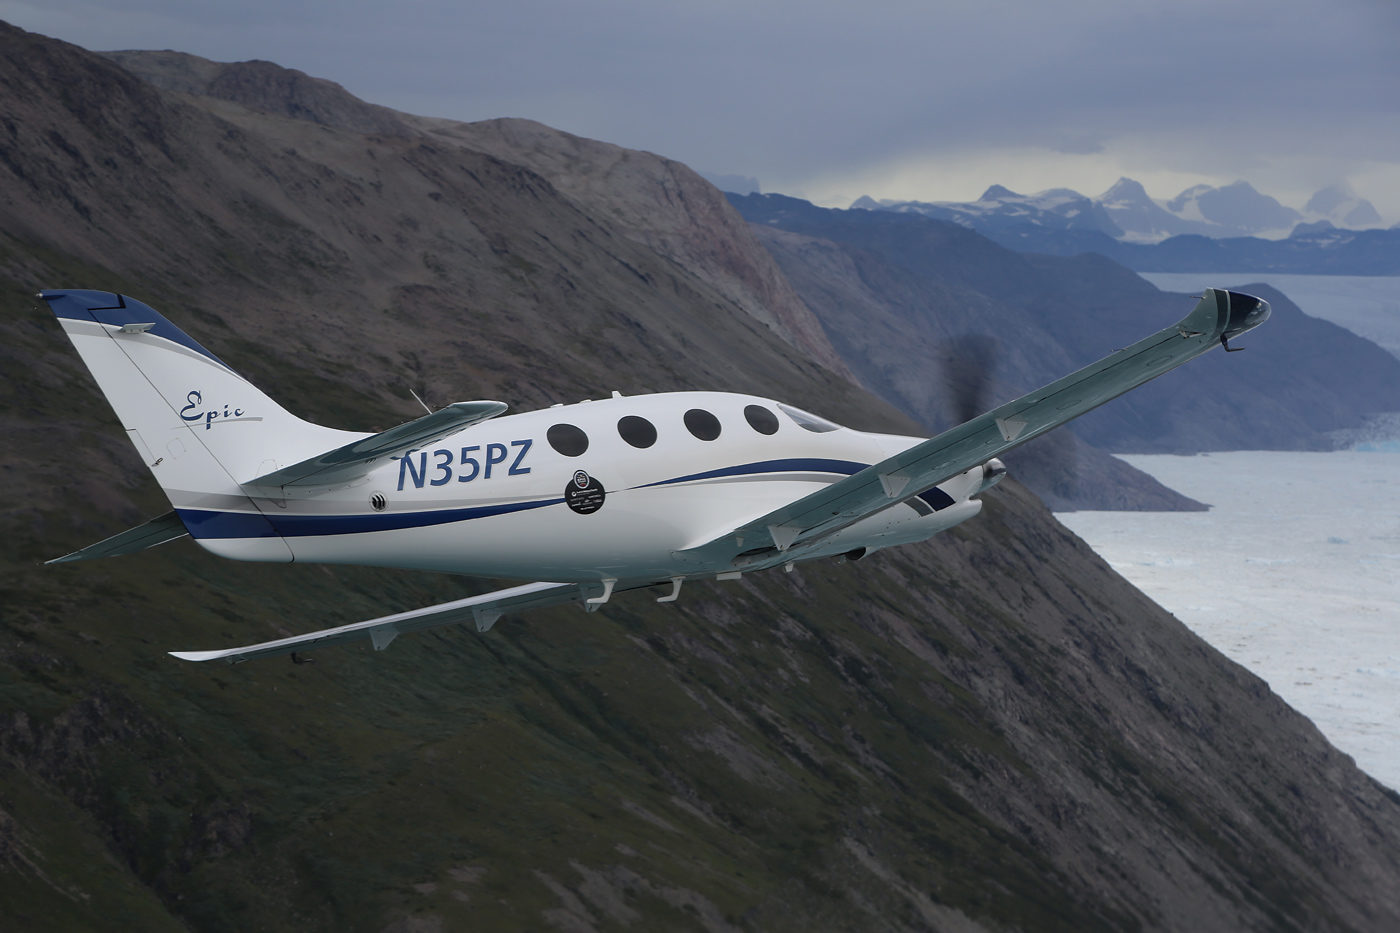 The carbon-fibre Epic E1000 has roots dating back to 2004. Certification efforts began in 2013, with quoted cruise speed as 325 knots and range as much as 1,650 nm. Jean Marie Urlacher Photo